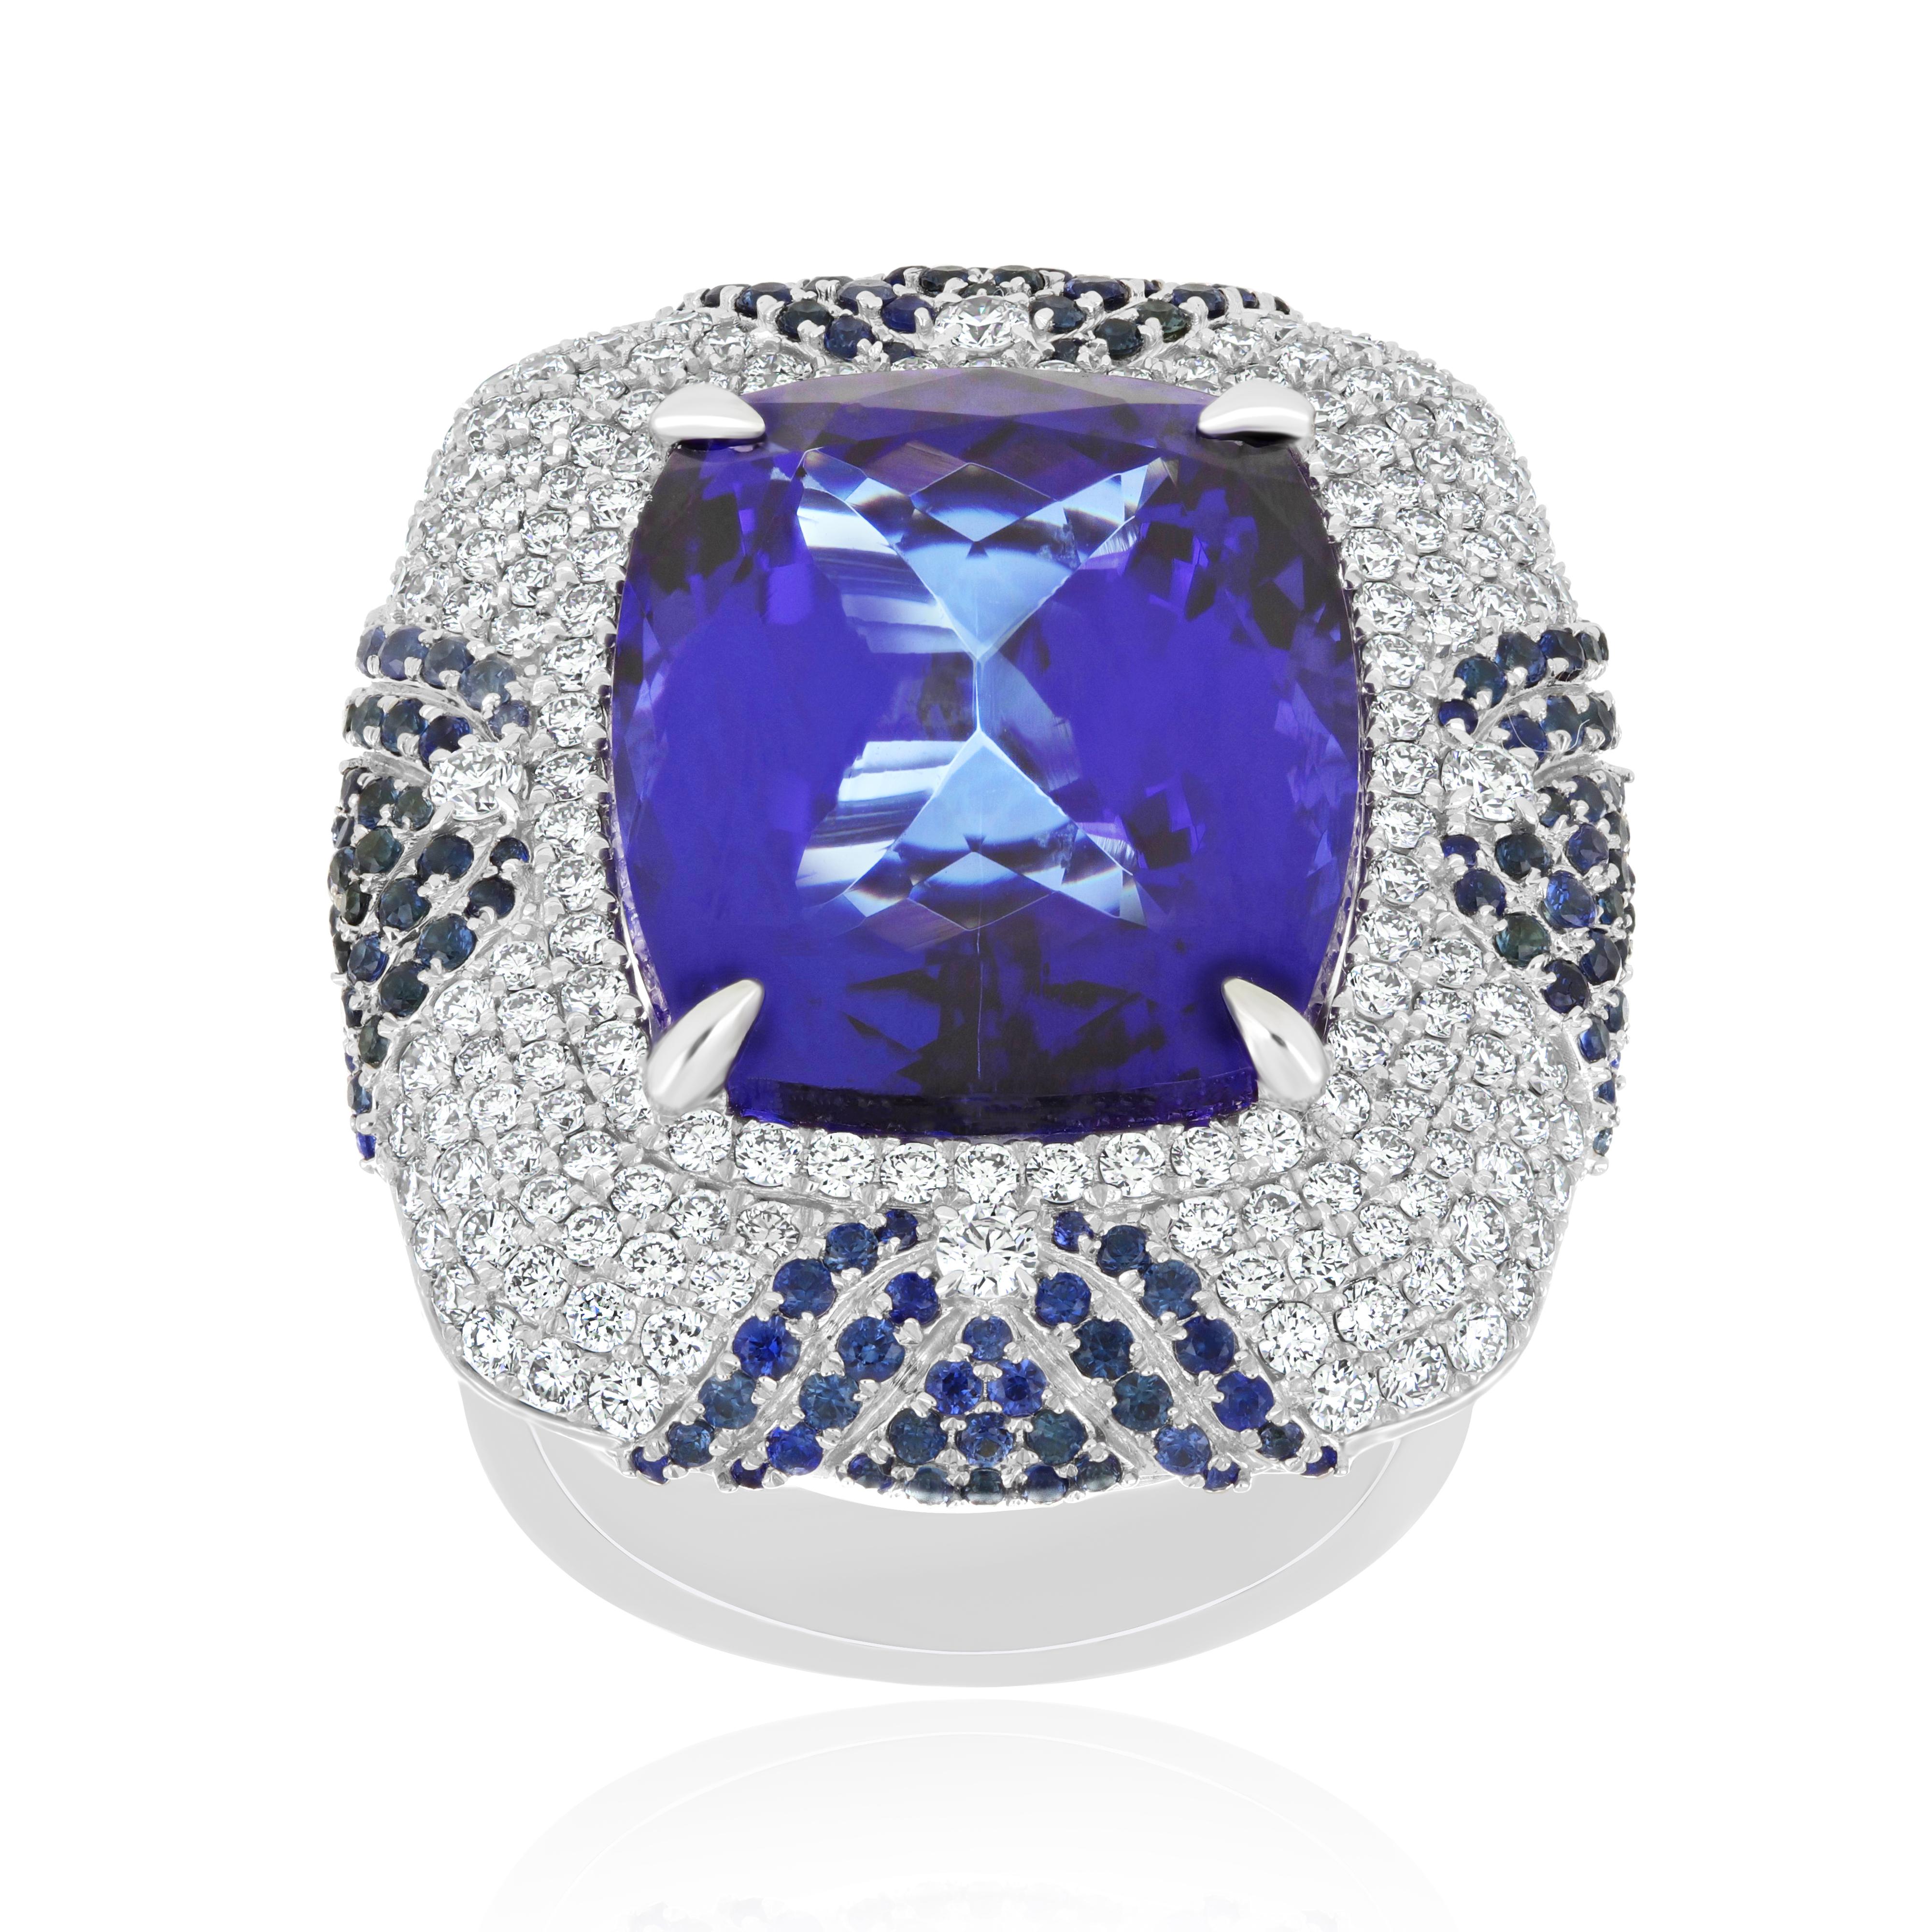 Elegant and Exquisitely detailed White Gold Ring, with a rare 24.30Cts (approx.) Cushion Round Corner
Tanzanite set in the center beautifully accented with Micro pave set Diamonds, weighing approx. 2.50 CT's (approx.). total carat weight and Blue